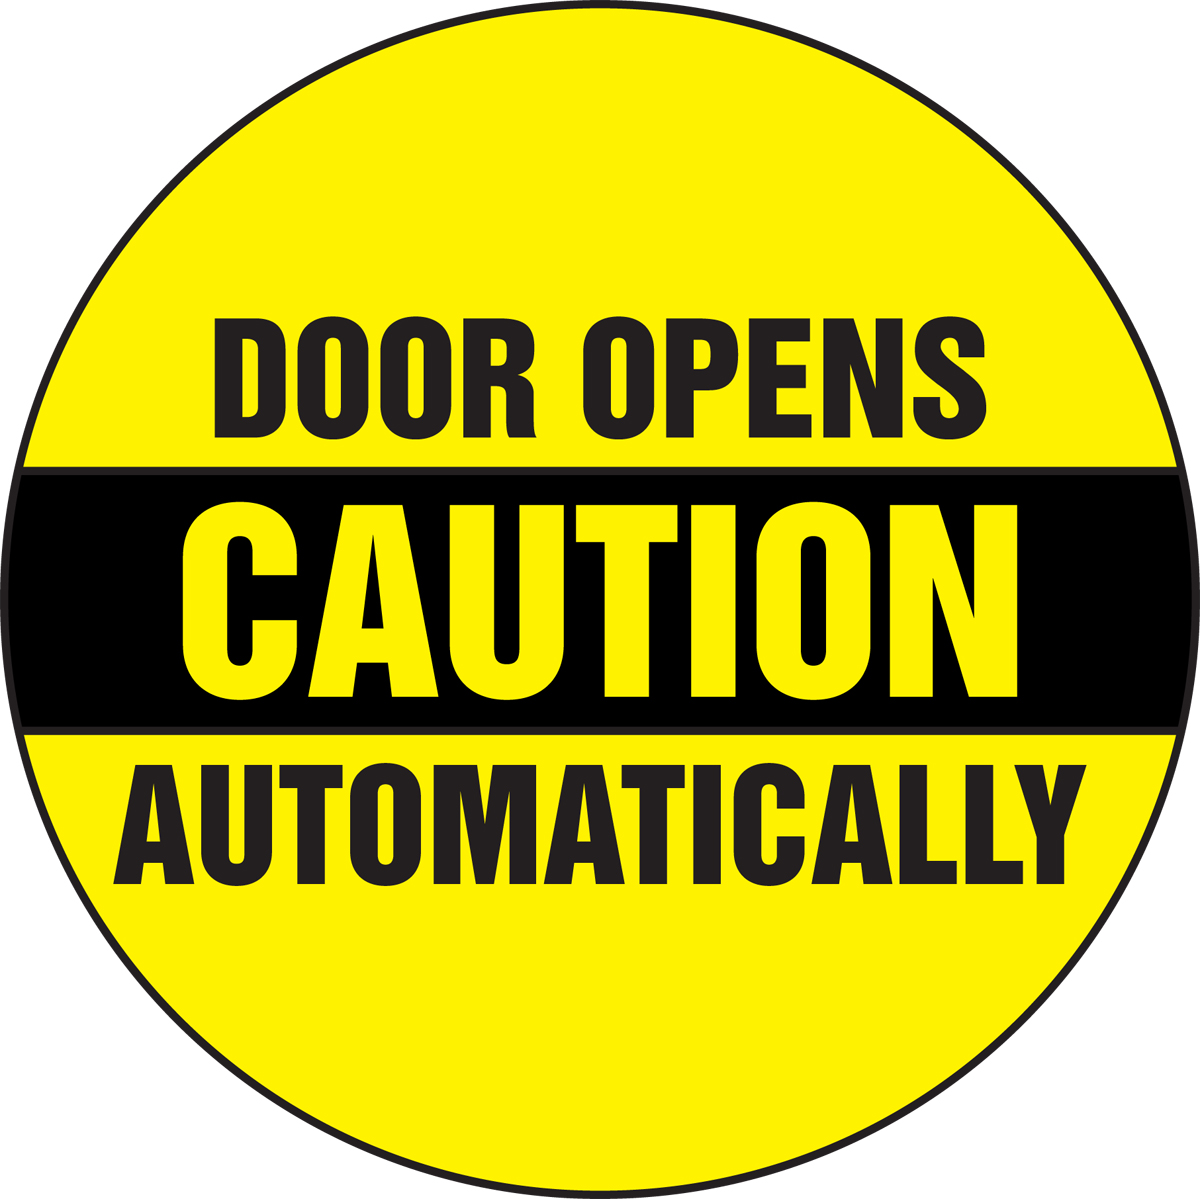 LegendCaution DO NOT Operate Without Guards in Place. Dura-Vinyl Accuform MEQM734XV Adhesive Sign Yellow/Black on White 14 Length x 10 Width x 0.006 Thickness 